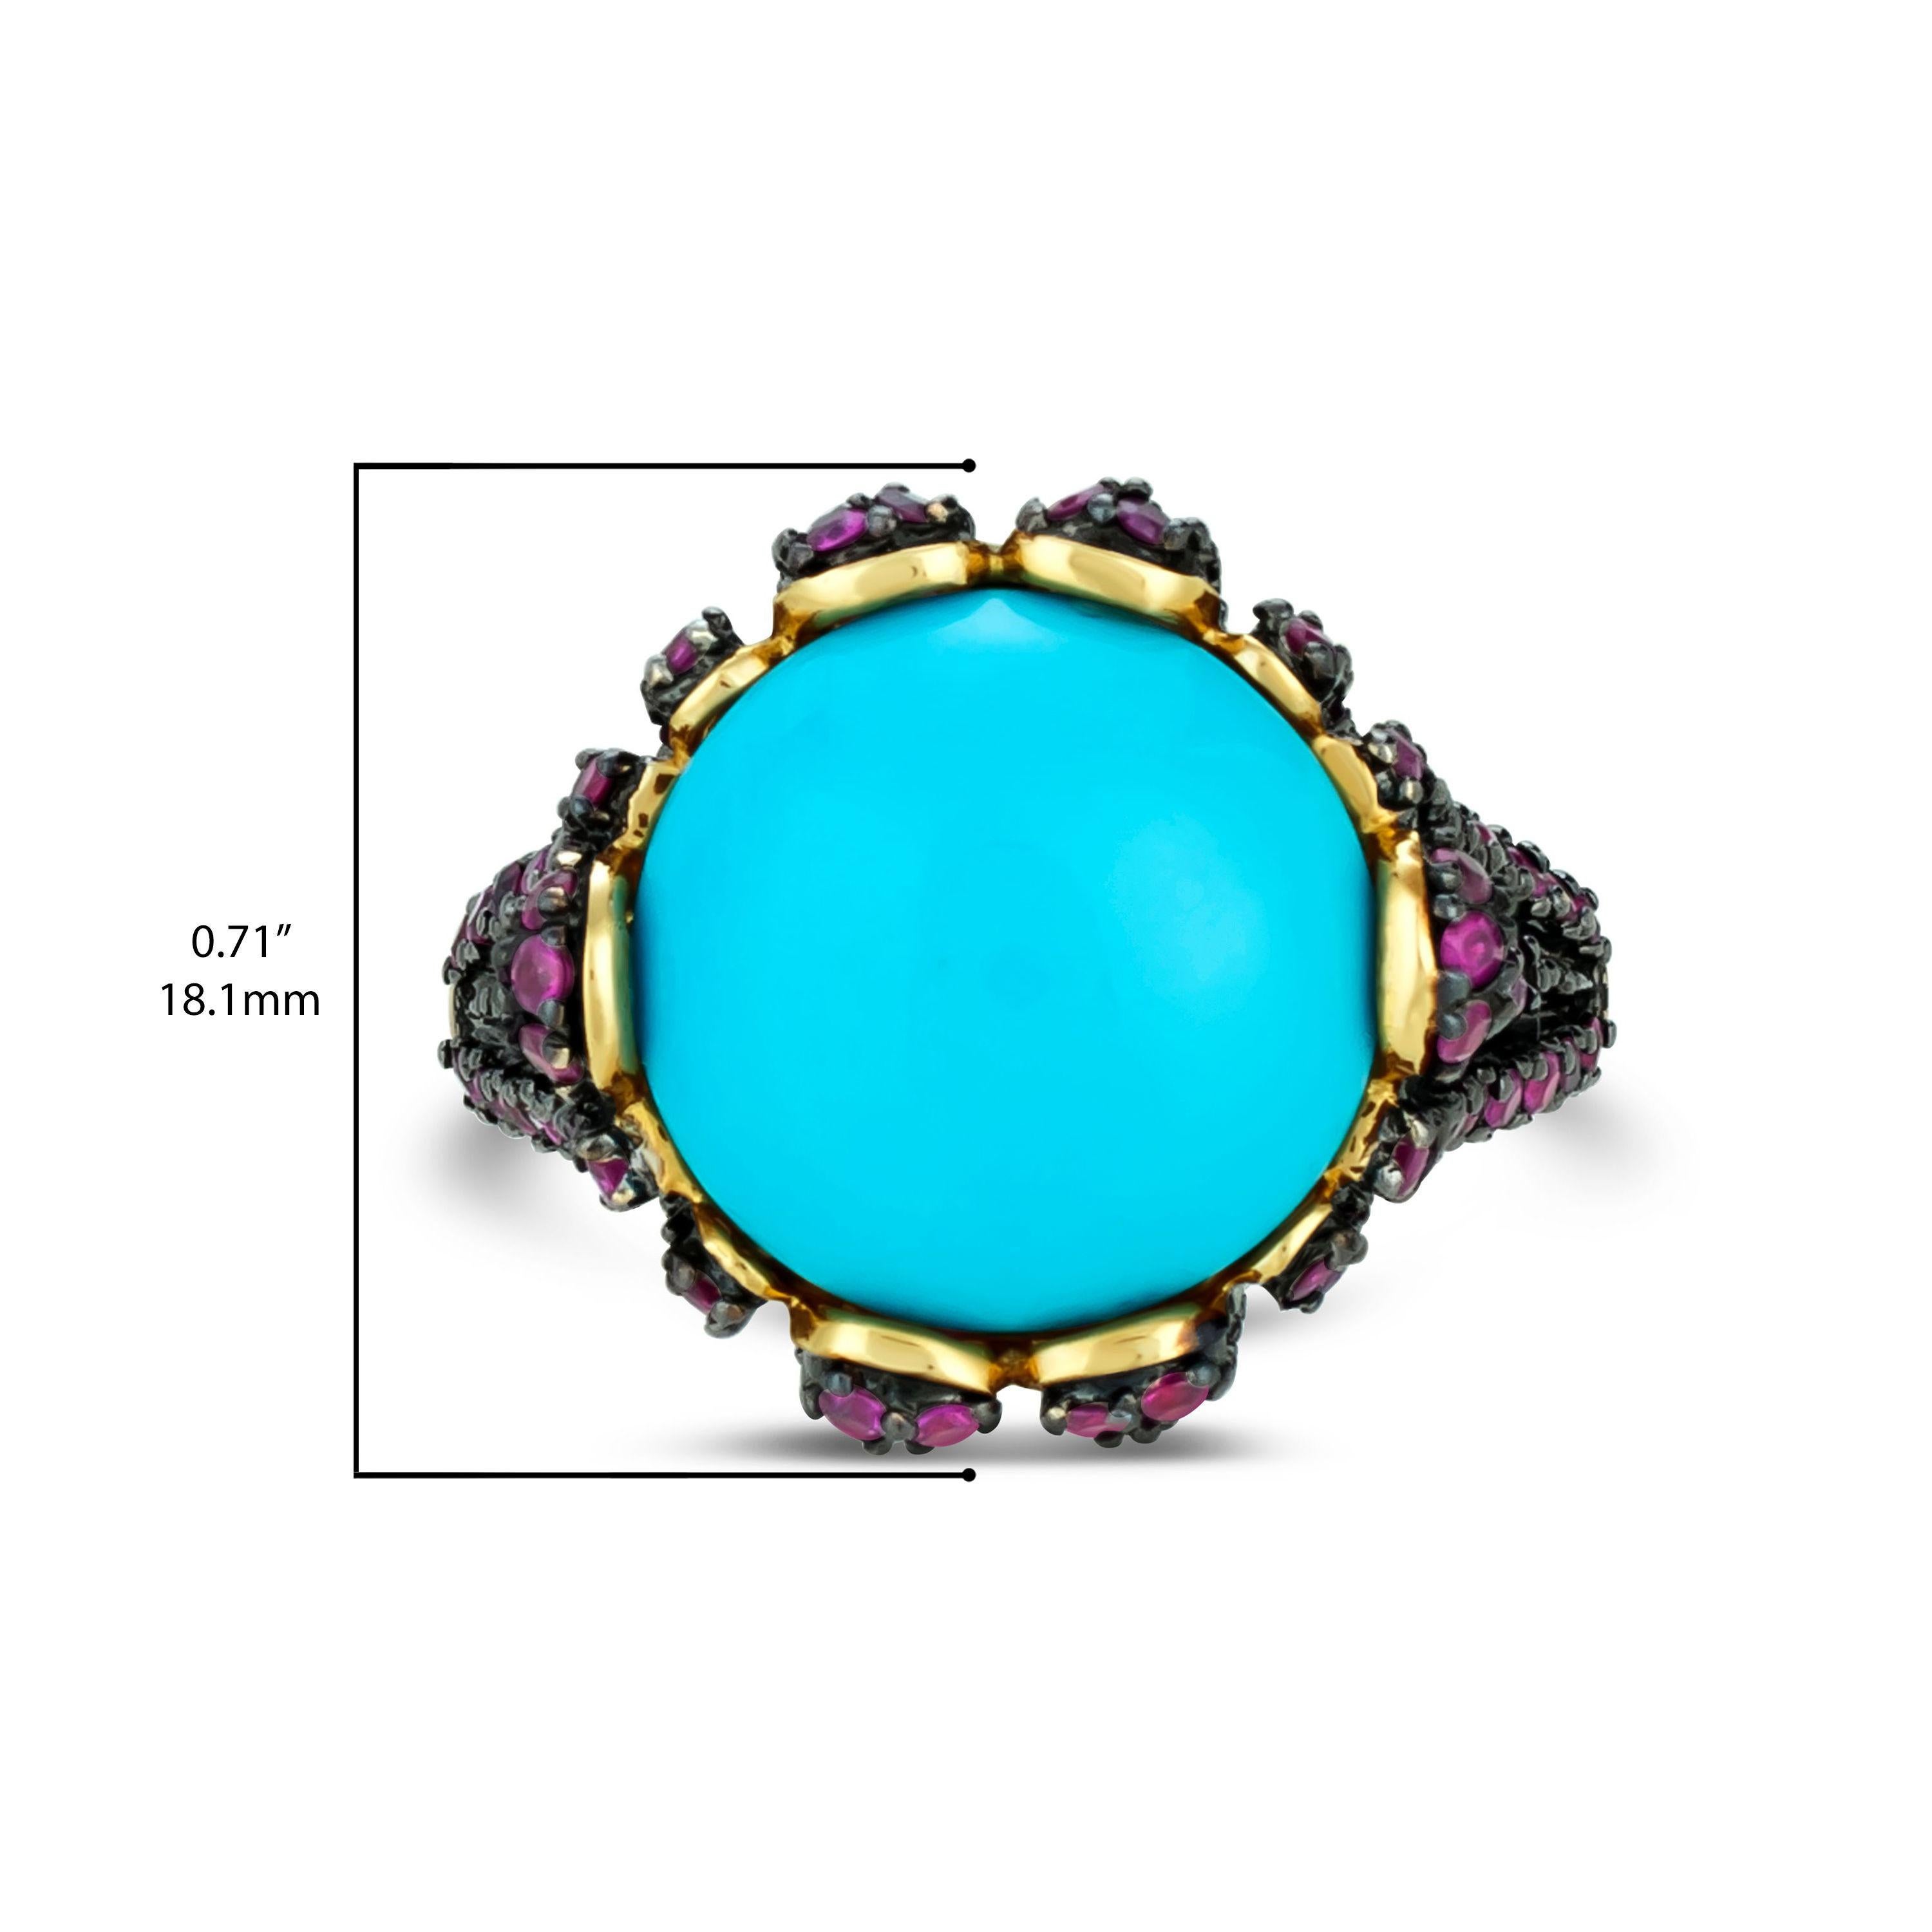 Carlo Viani Turquoise Ring 7 7/8 cts Gemstone Cocktail Ring Size 7